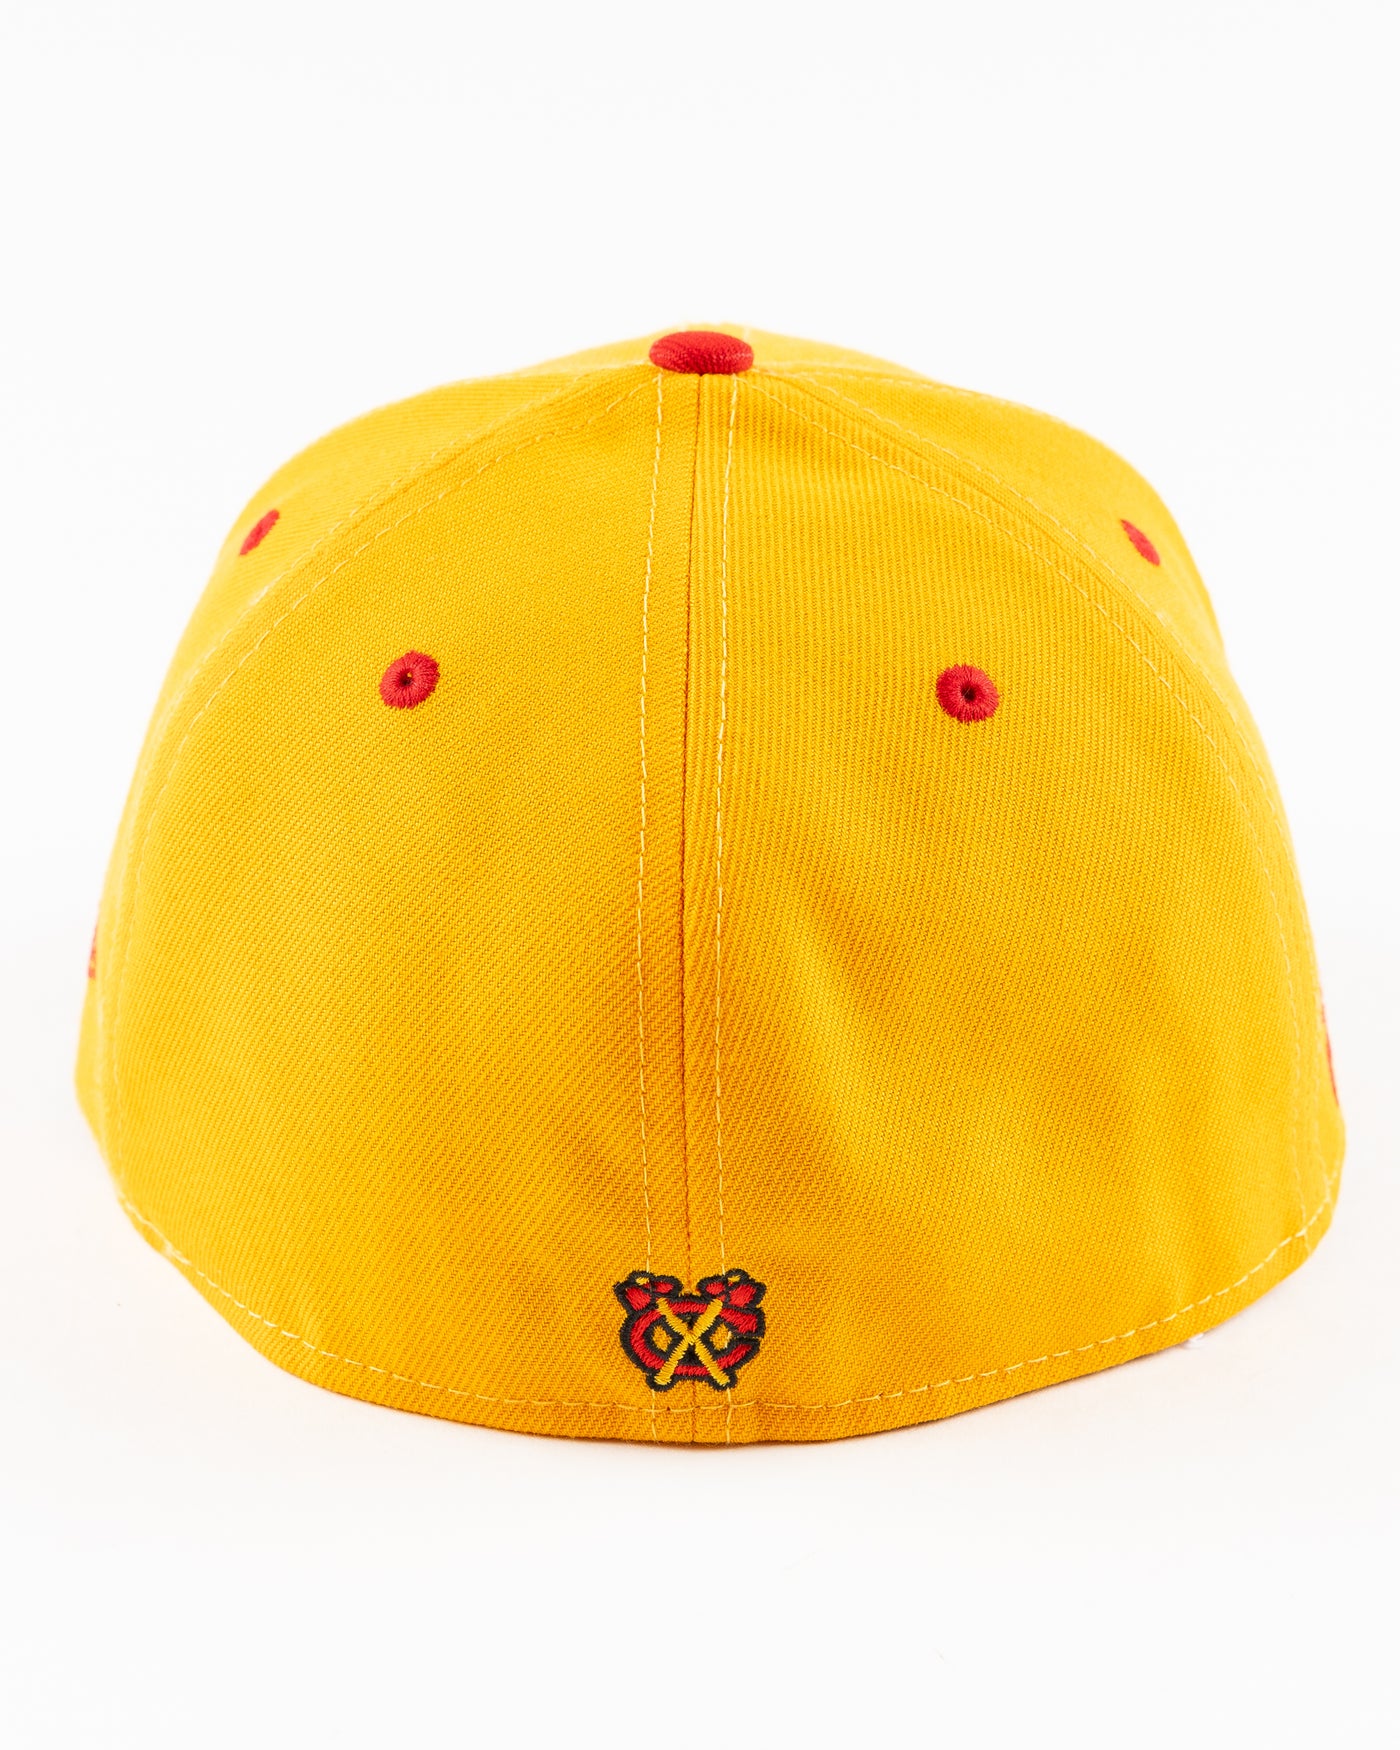 yellow and red New Era fitted cap with Chicago Blackhawks wordmark on front - back lay flat